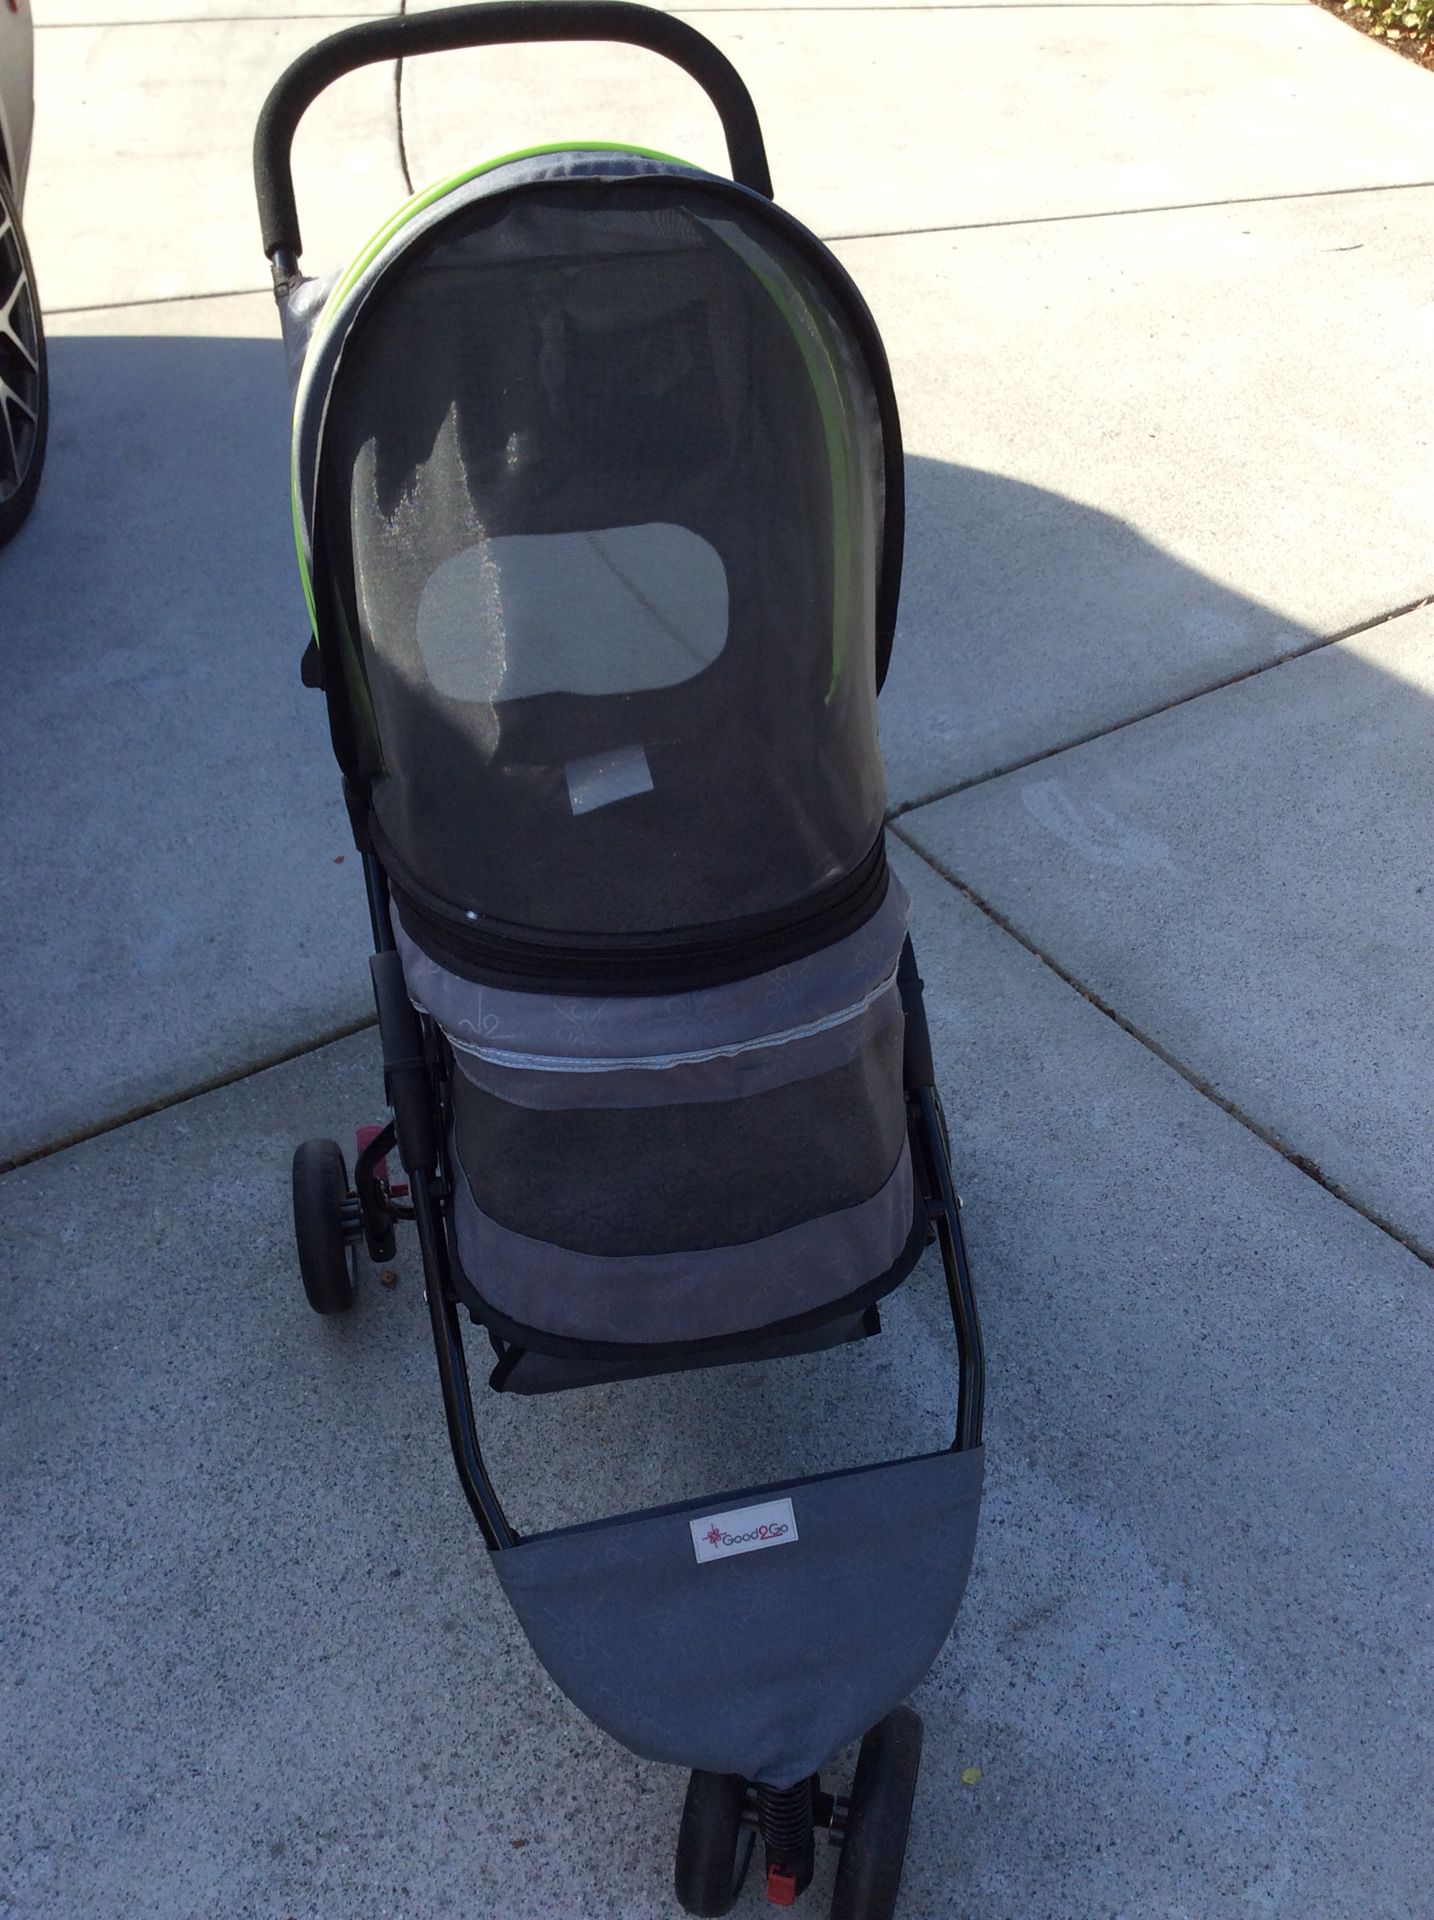 Good2Go pet stroller Paid over $300.00 Asking $125.00